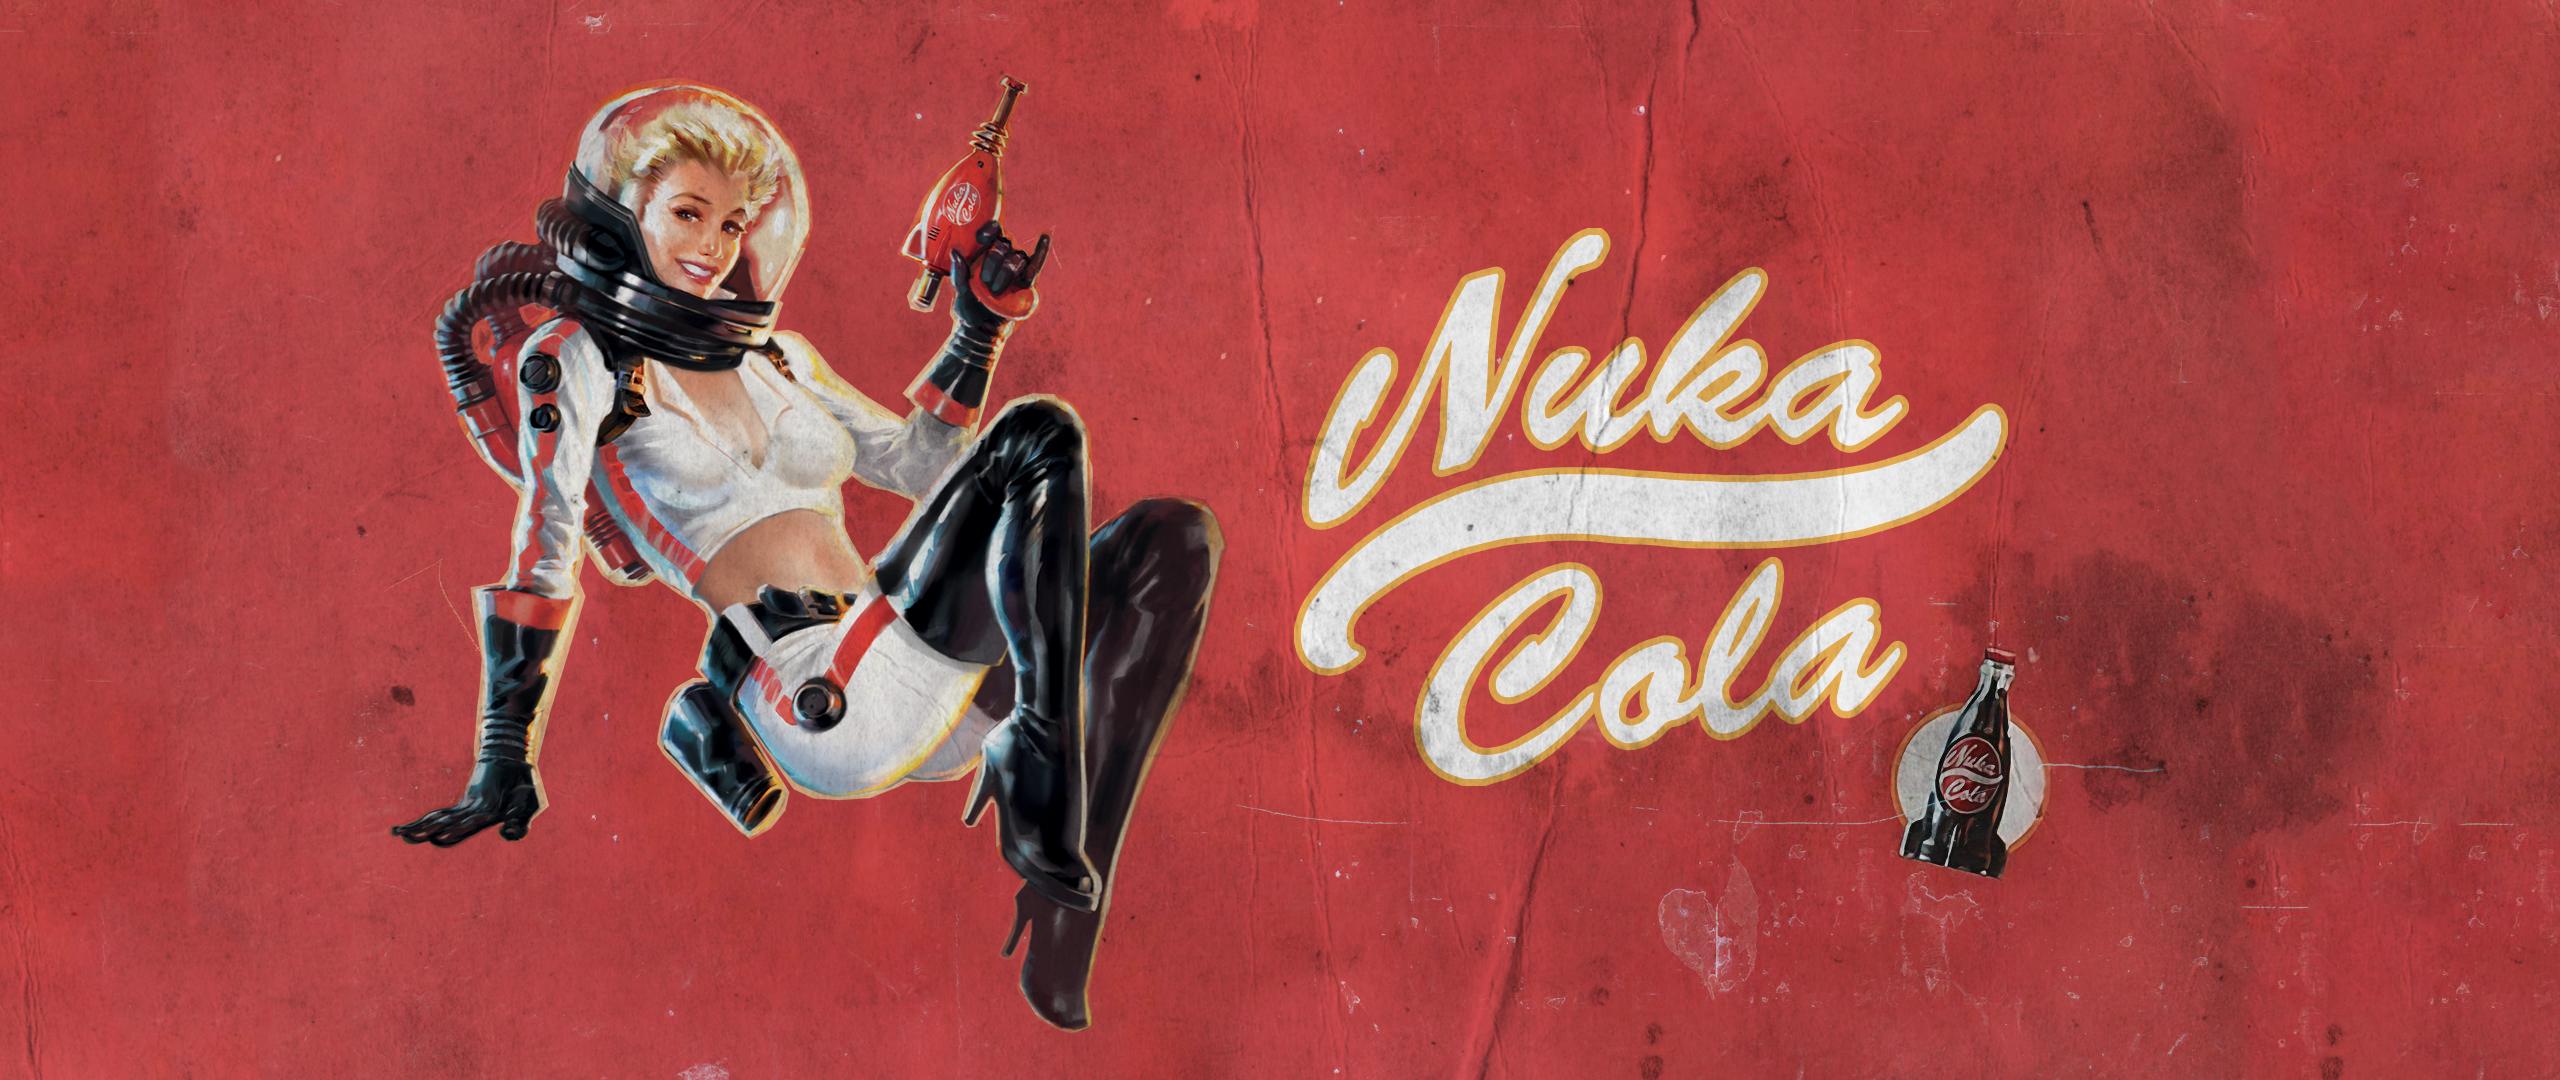 Fixed Up The Nuka Girl Pinup Wallpaper!